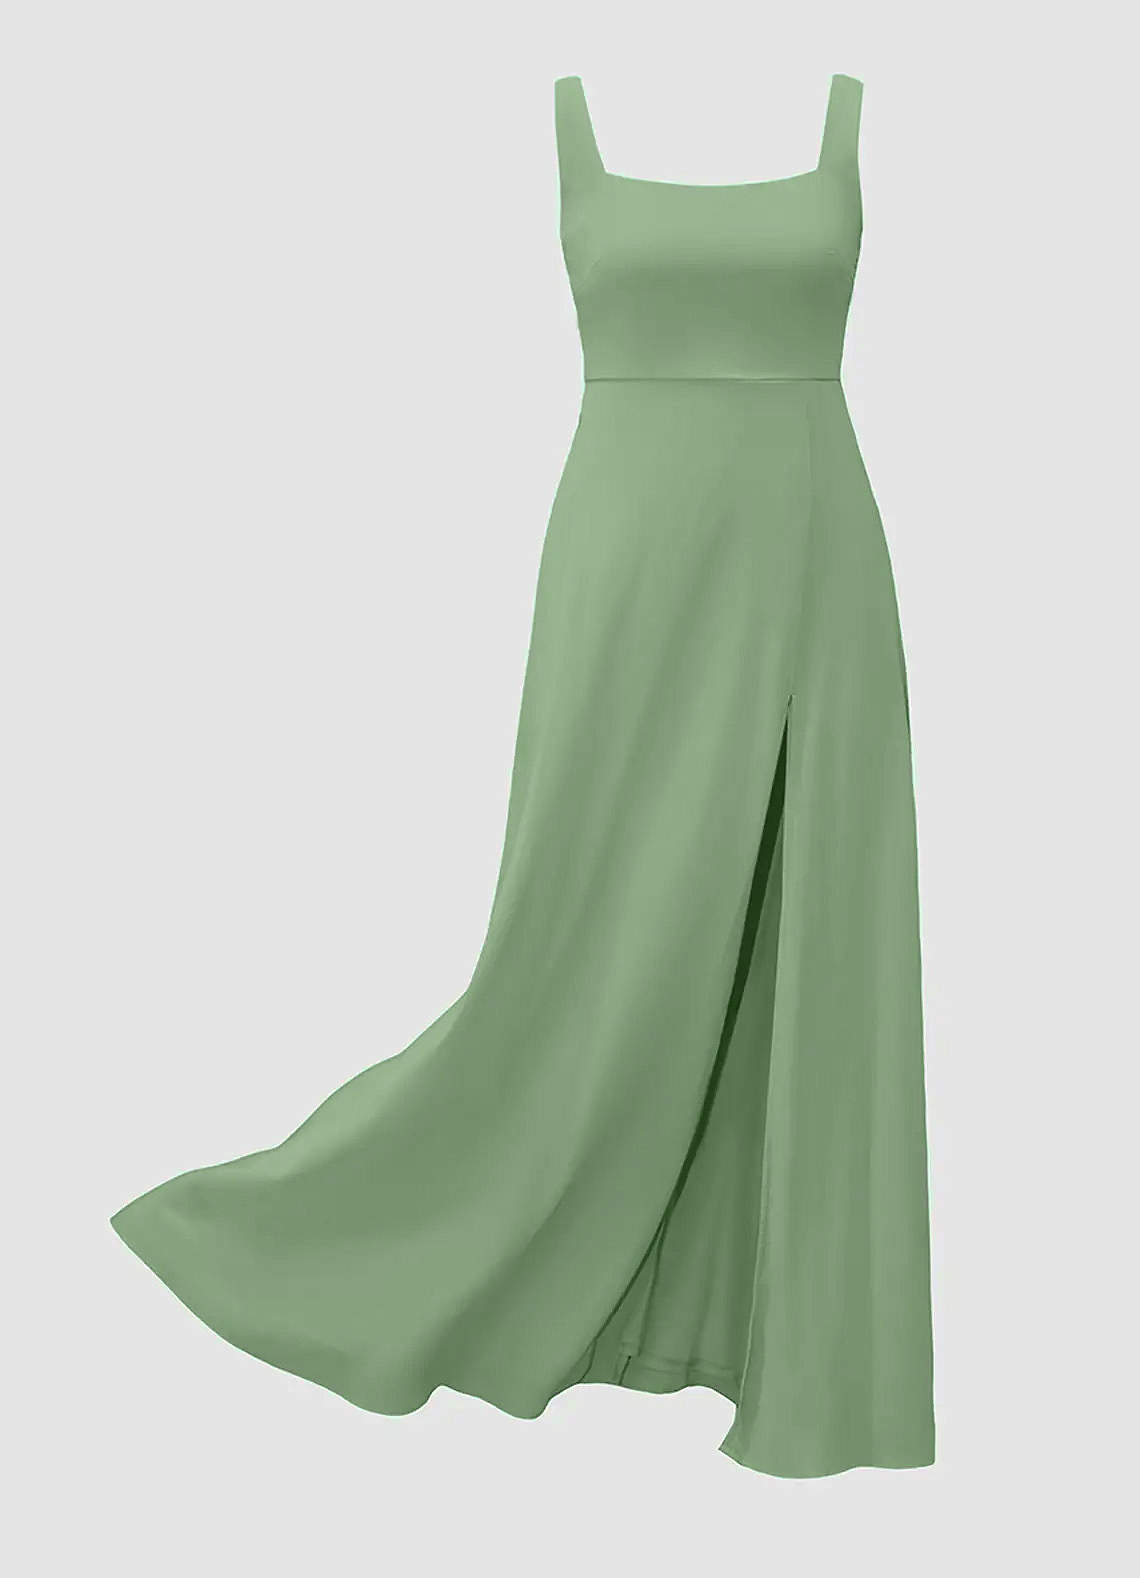 Perfect Day Sage Green Square Neck Maxi Dress image1